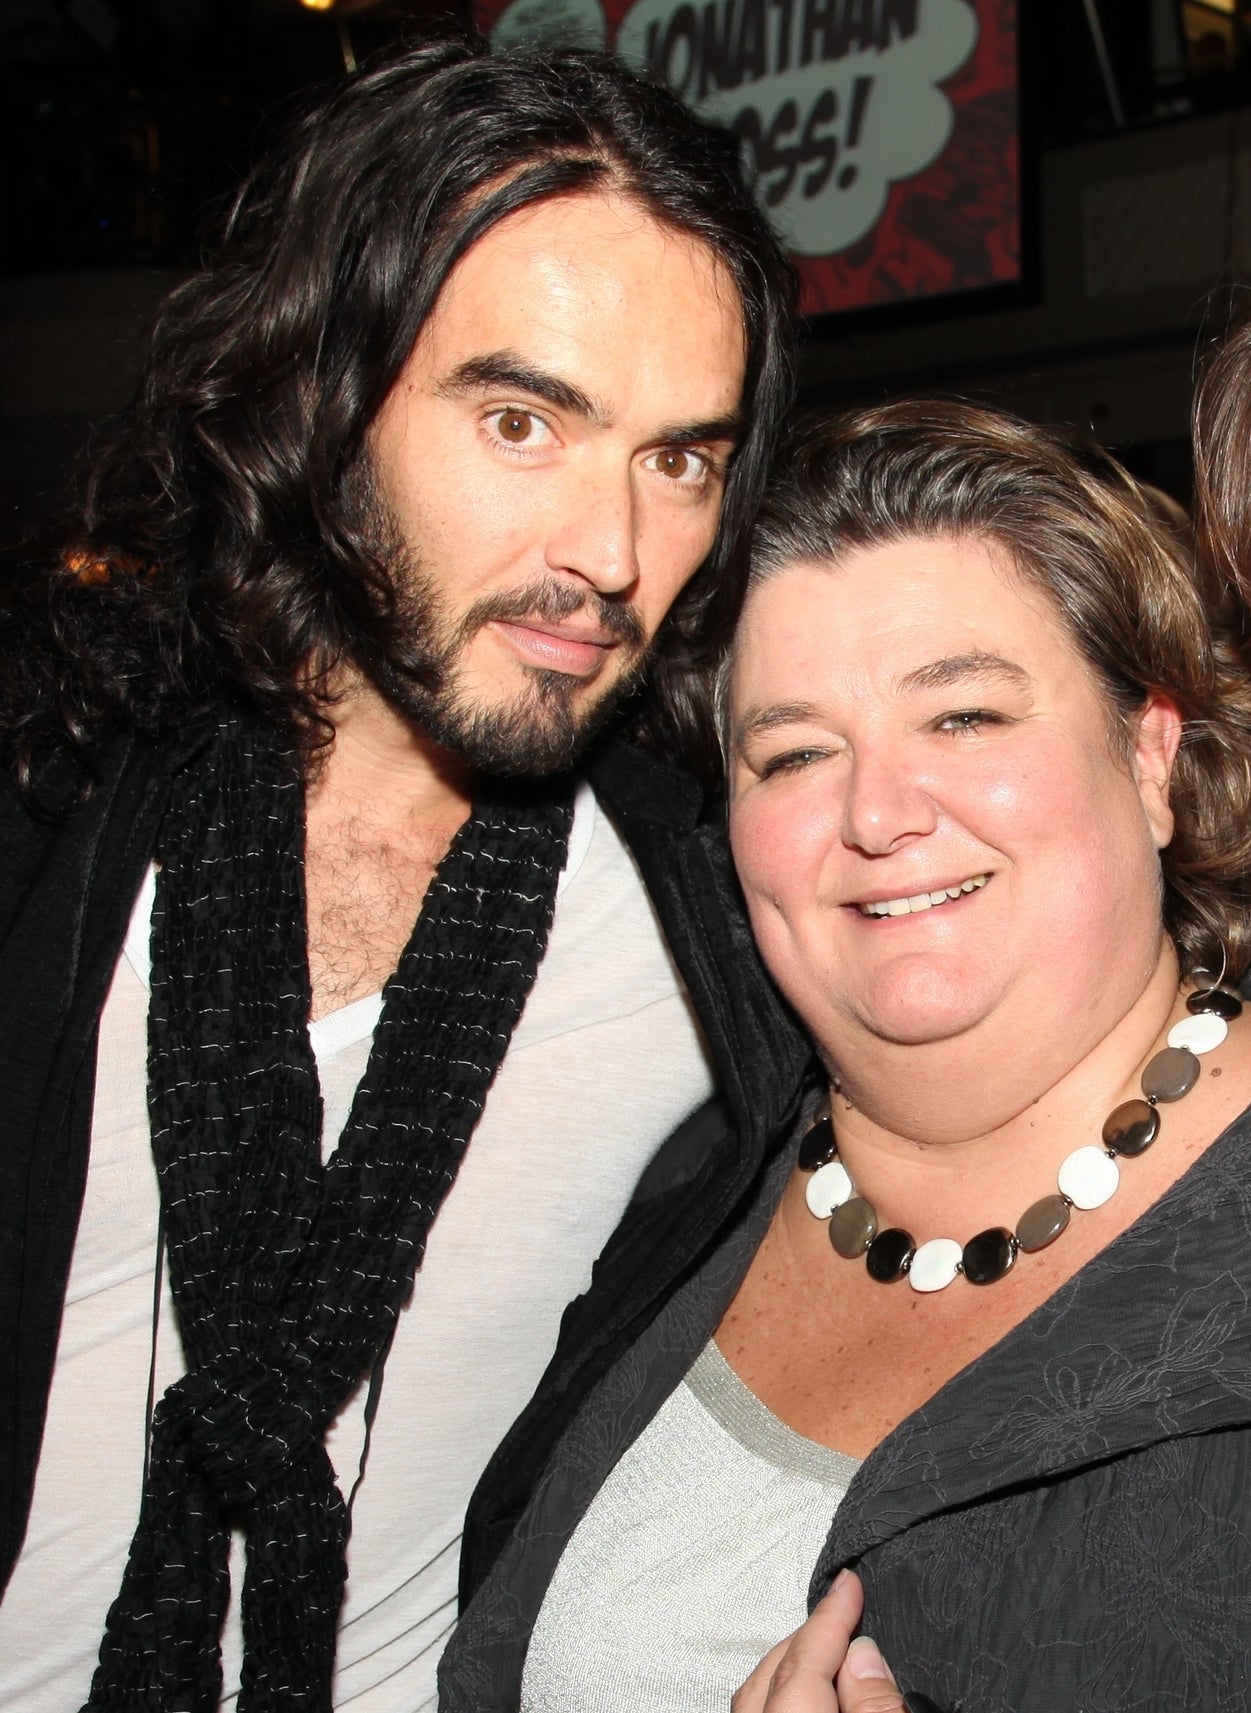 Russell Brand and Lesley Douglas